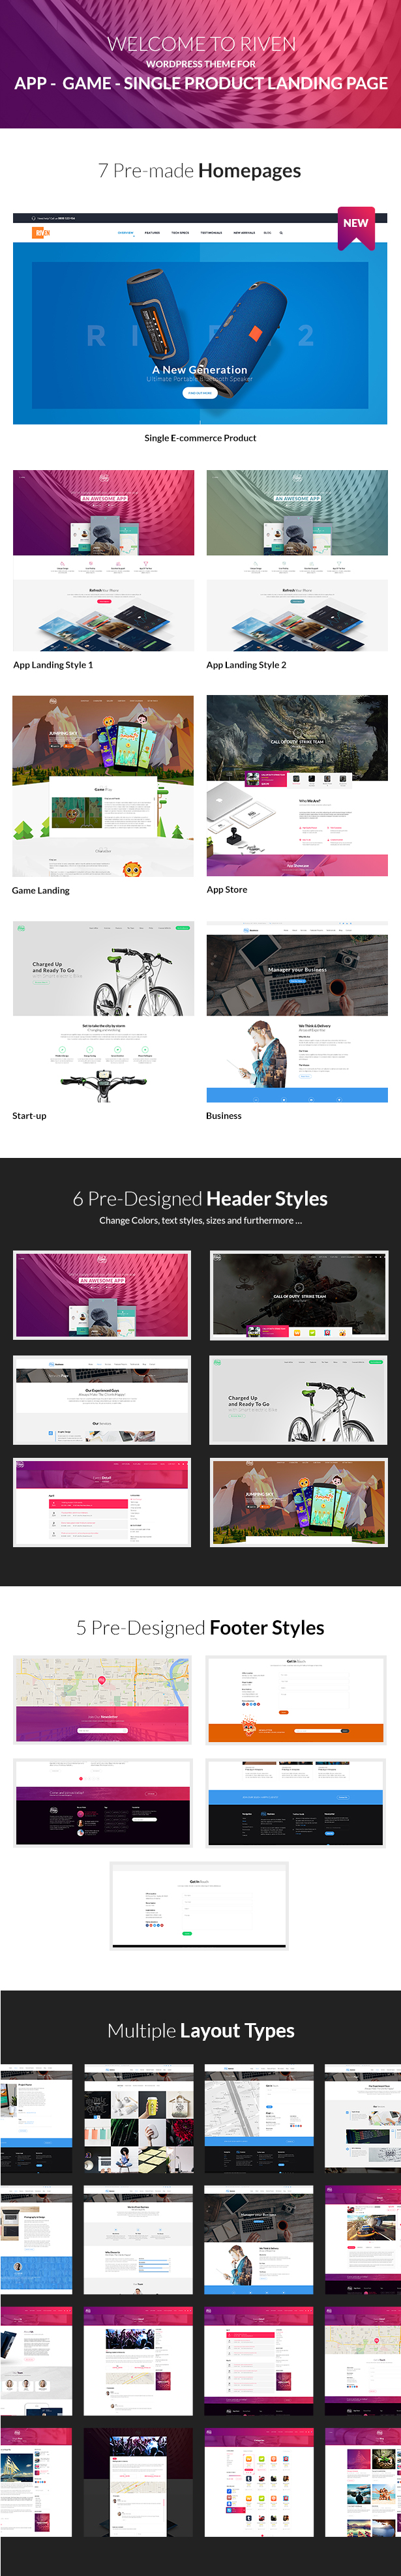 Riven - WordPress Theme for App, Game, Single Product Landing Page - 5